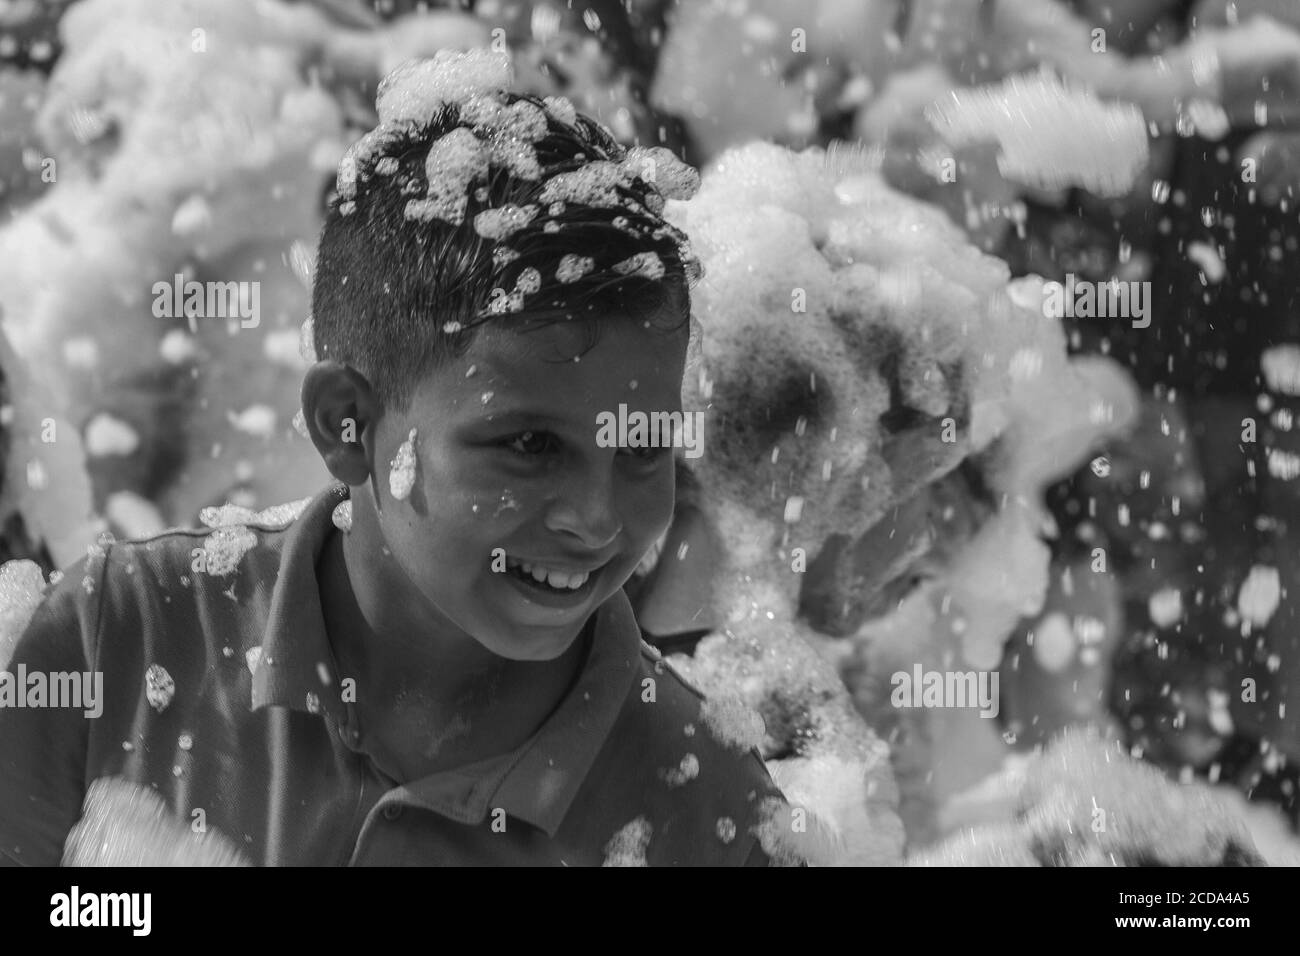 Kamennomostsky, Russia - September 1, 2018: Happy children having fun at a foam party at a holiday town day Kamennomostsky in an autumn park black and Stock Photo